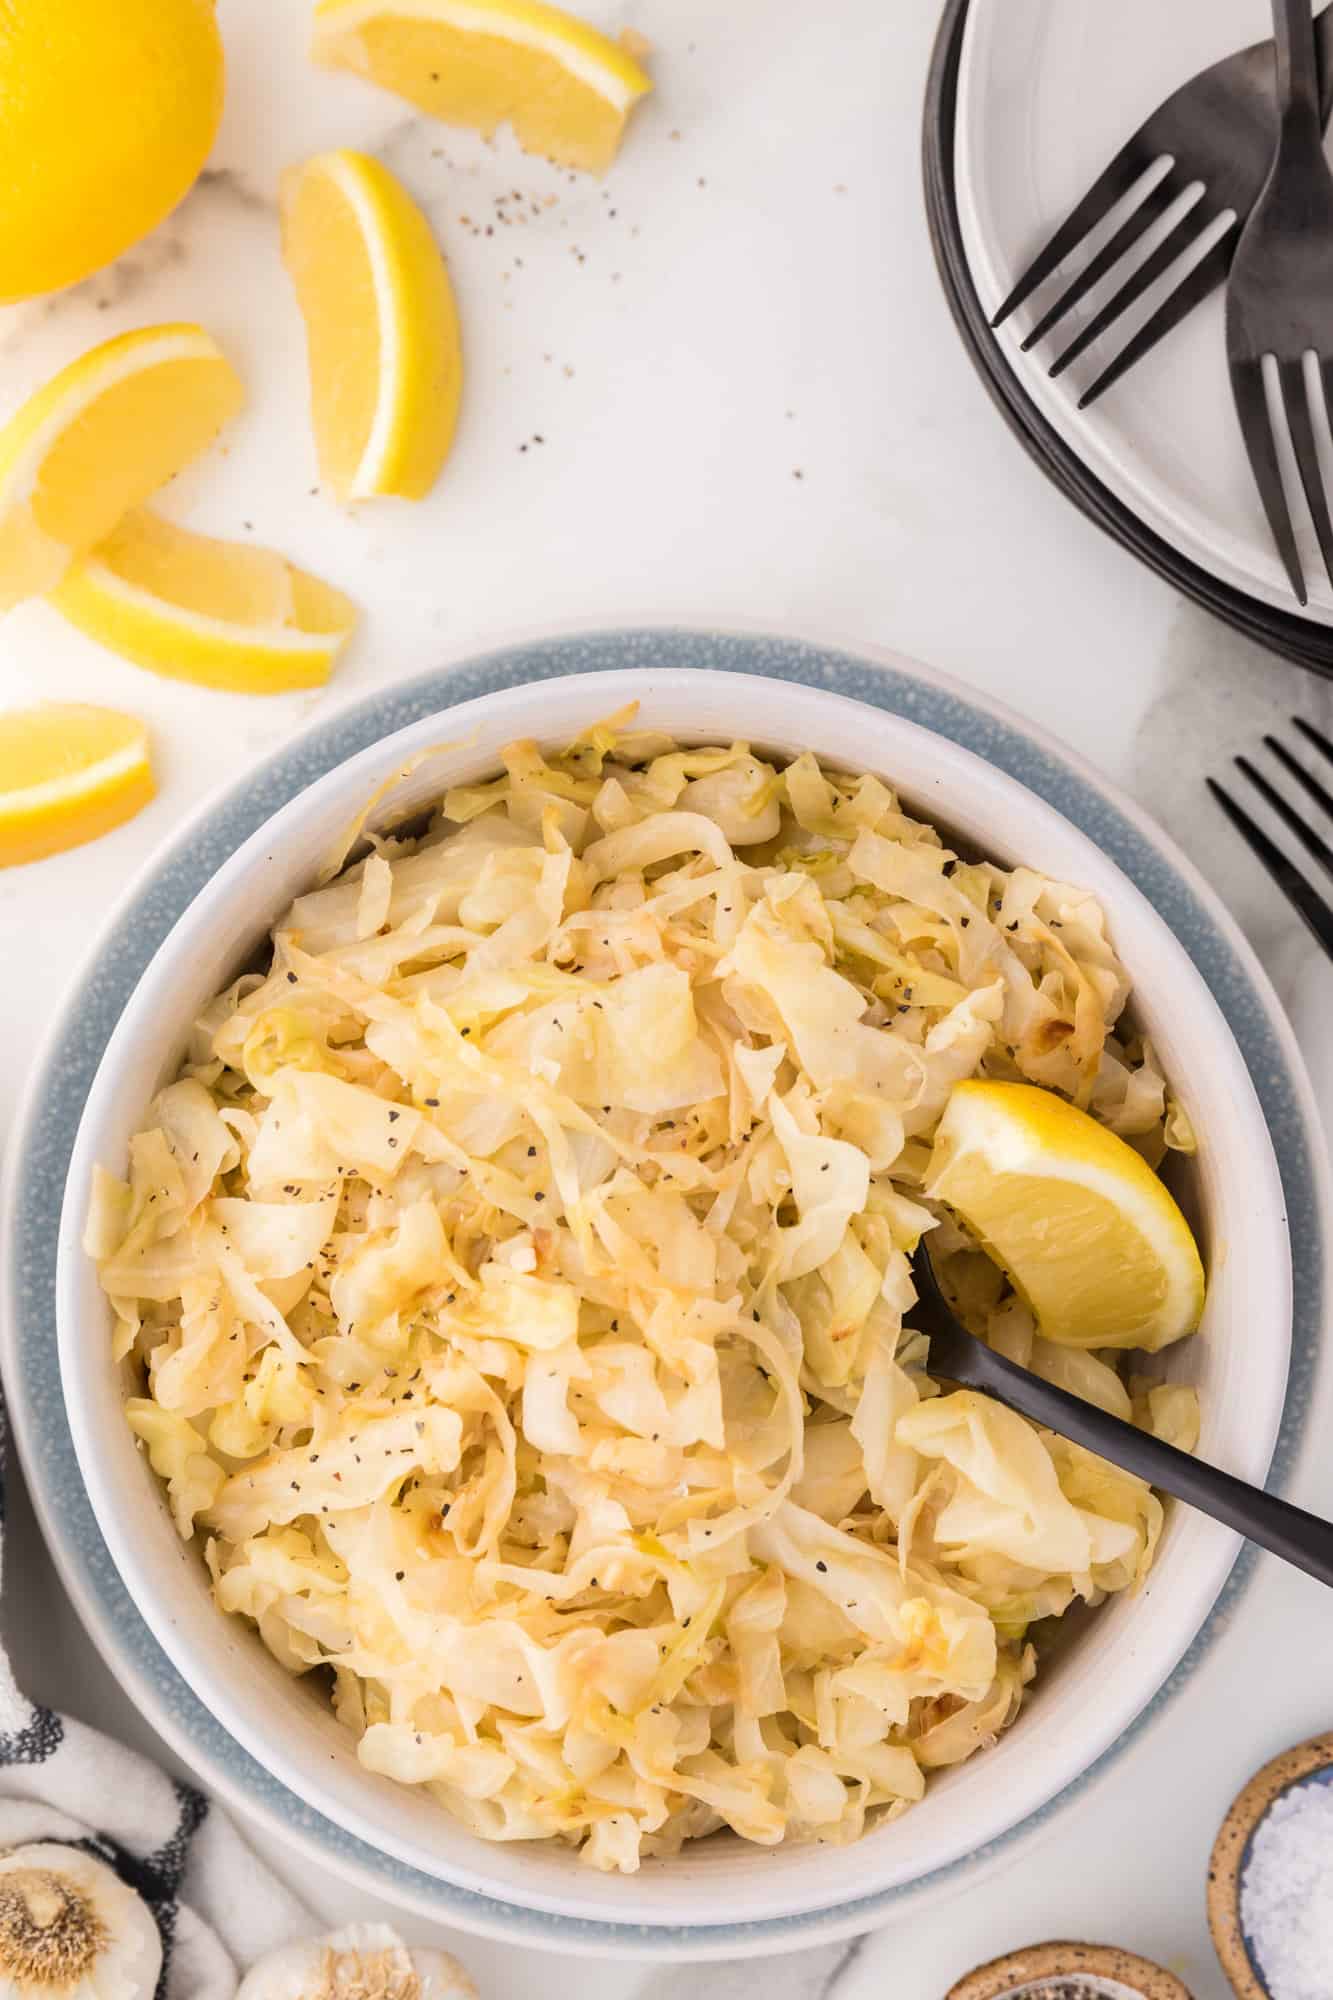 Cooked shredded cabbage in a large serving bowl.